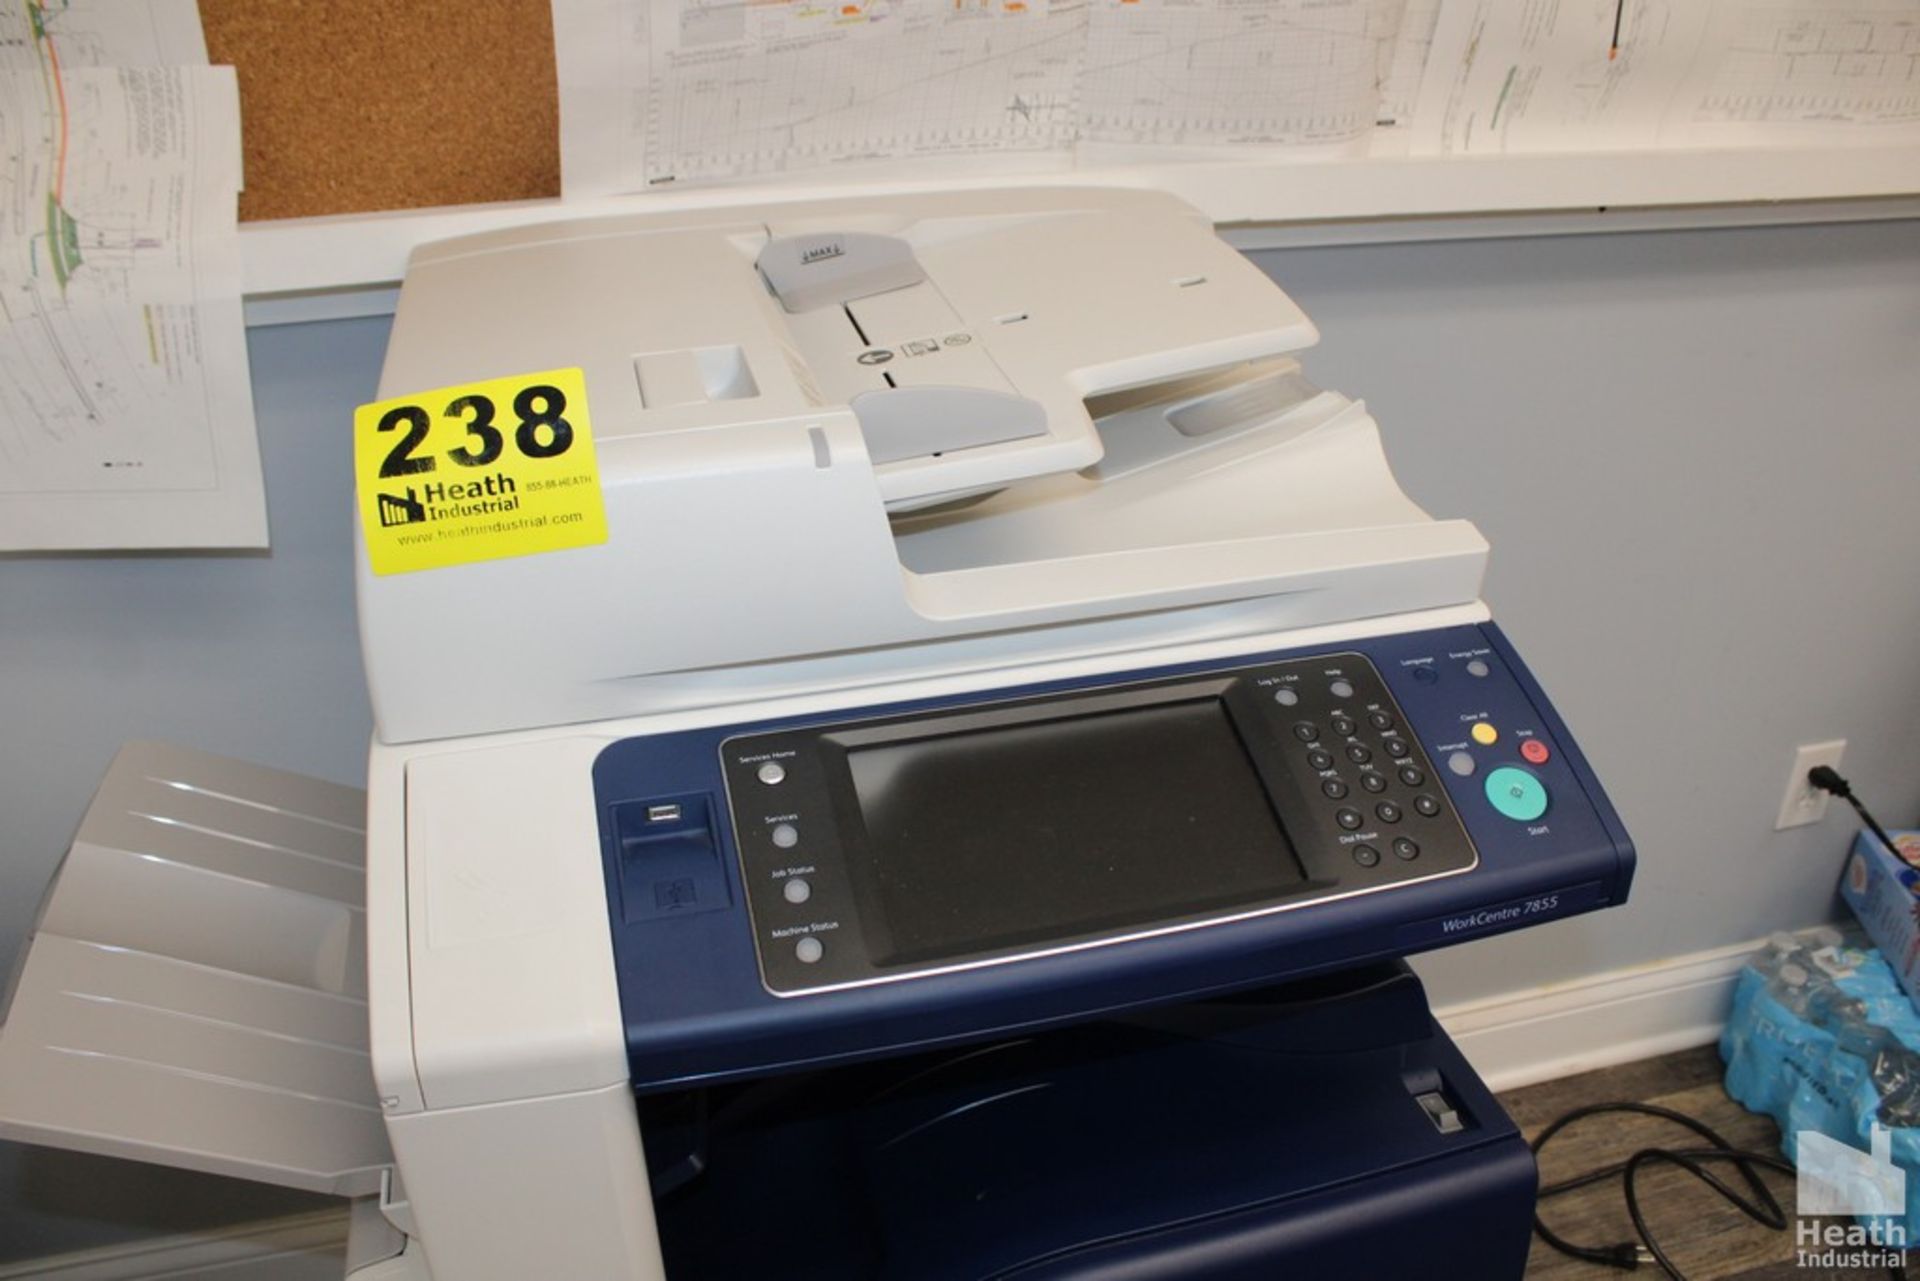 XEROX WORK CENTER 7855 MULTIFUNCTION COLOR COPIER, WITH ADF, PAPER TRAYS, ETC. - Image 3 of 3